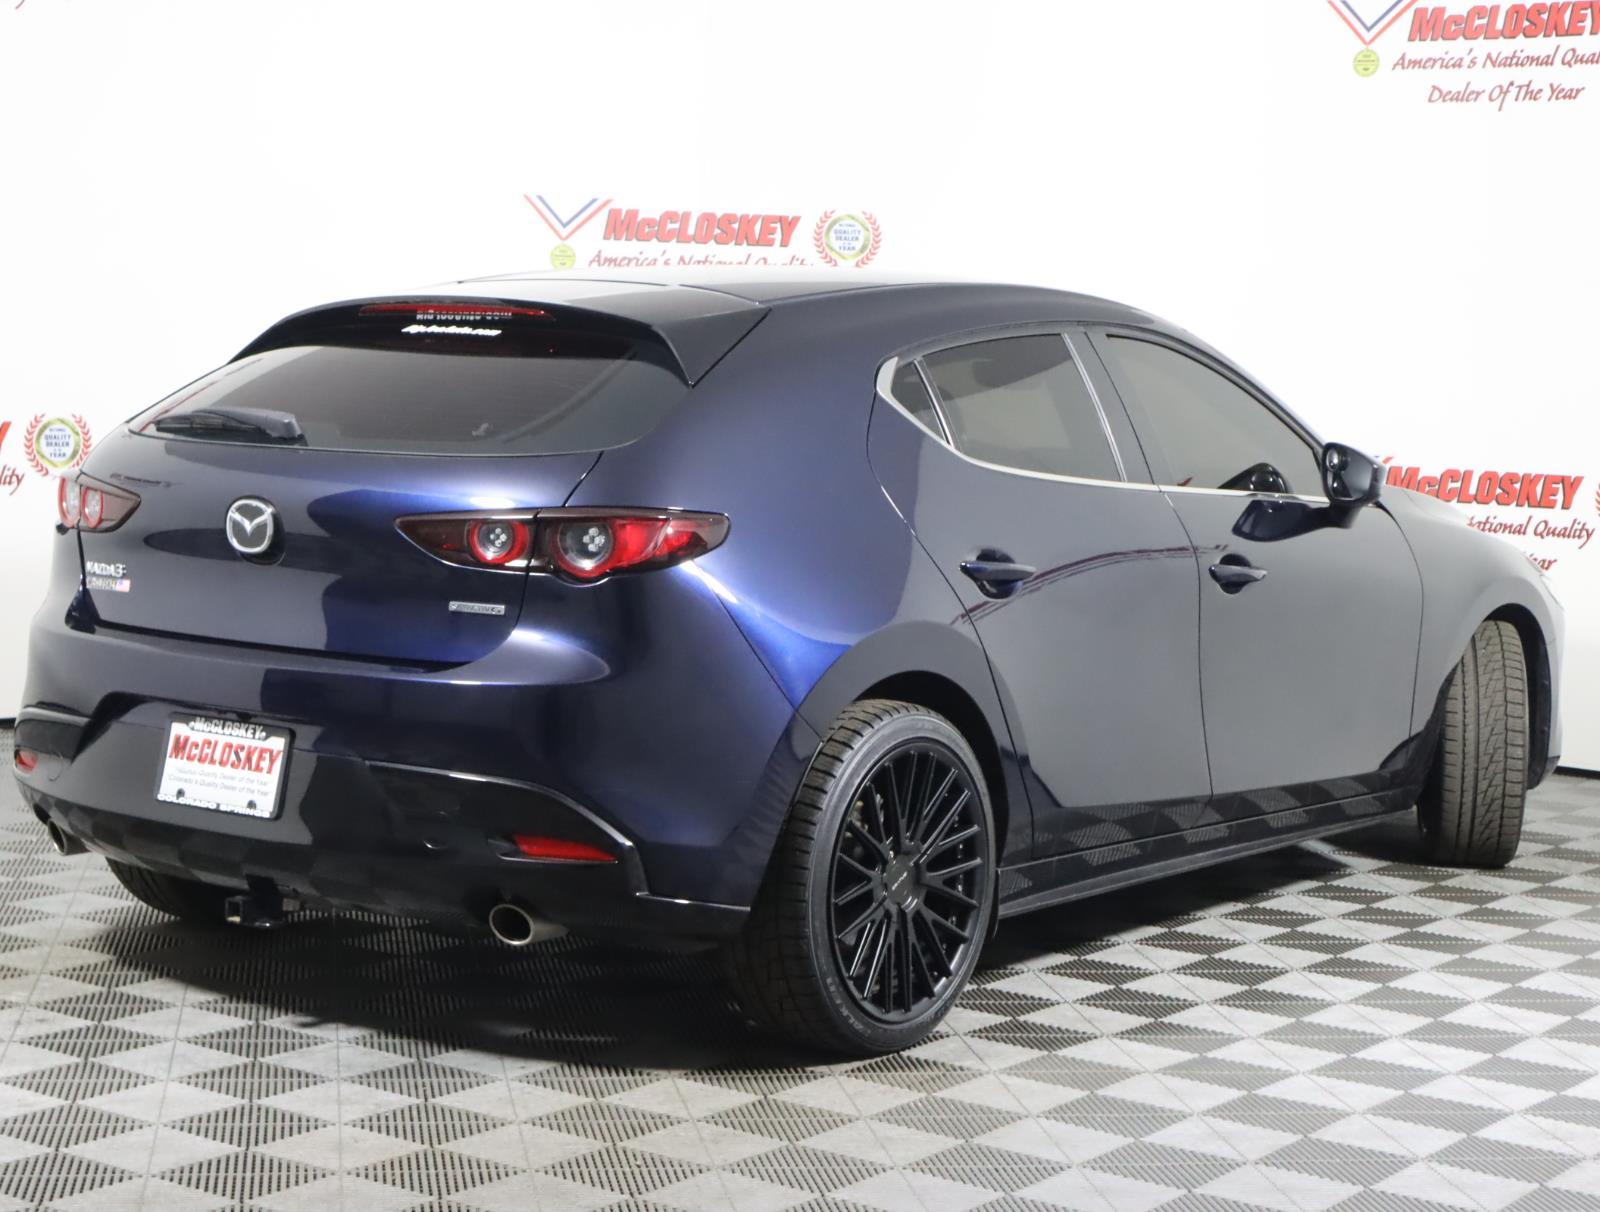 Preowned 2021 MAZDA Mazda3 2.5 S ONE OWNER! for sale by McCloskey Imports & 4X4's in Colorado Springs, CO